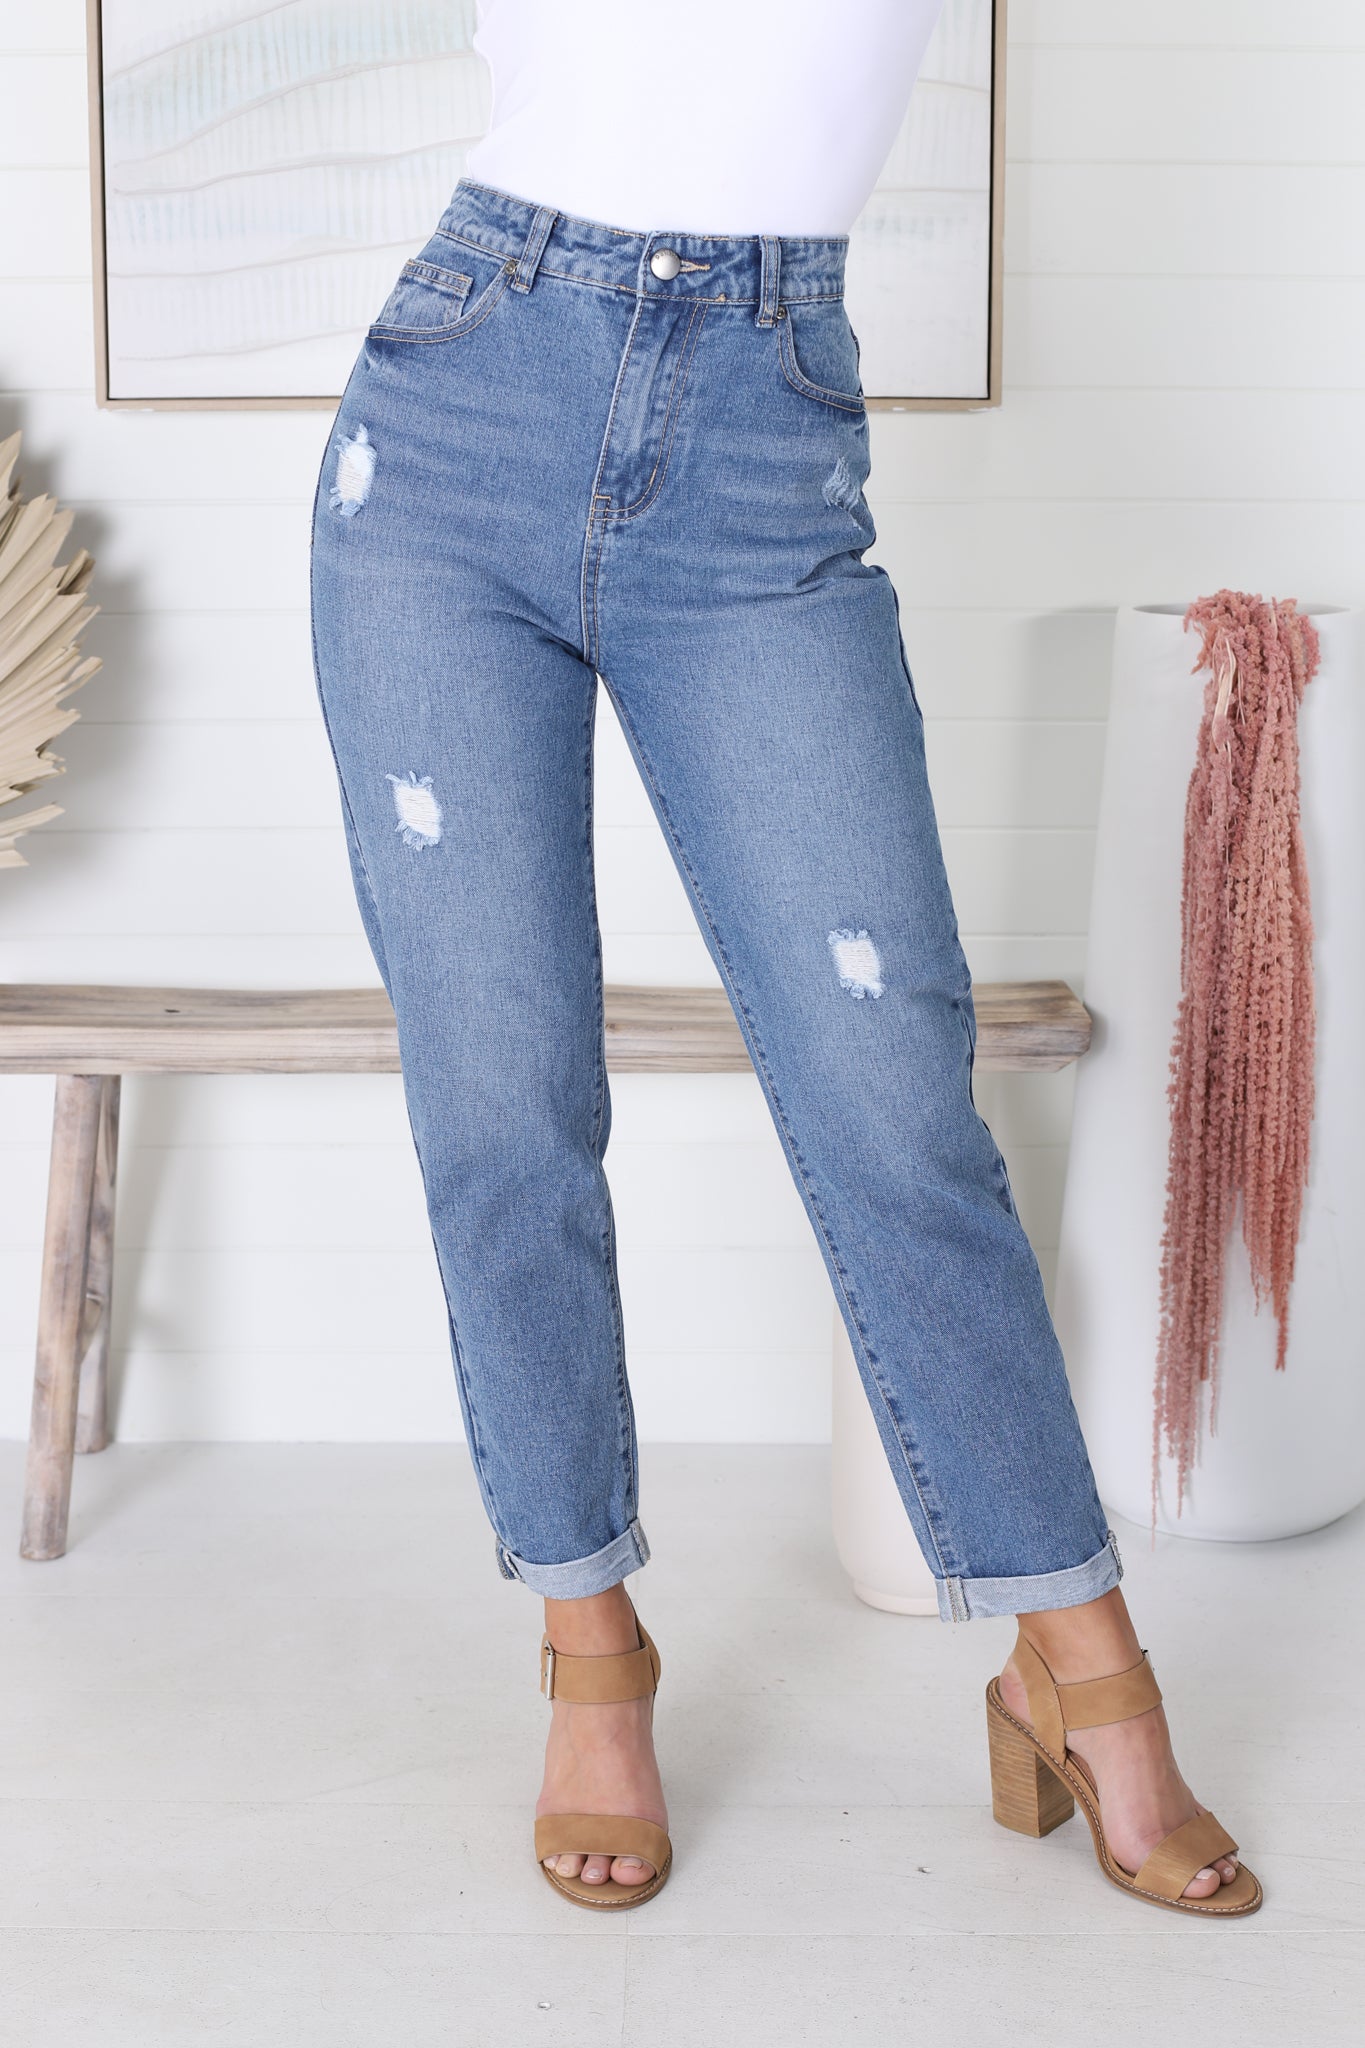 Nettie Jeans - High Waisted Distressed Straight Leg Folded Cuff Jeans